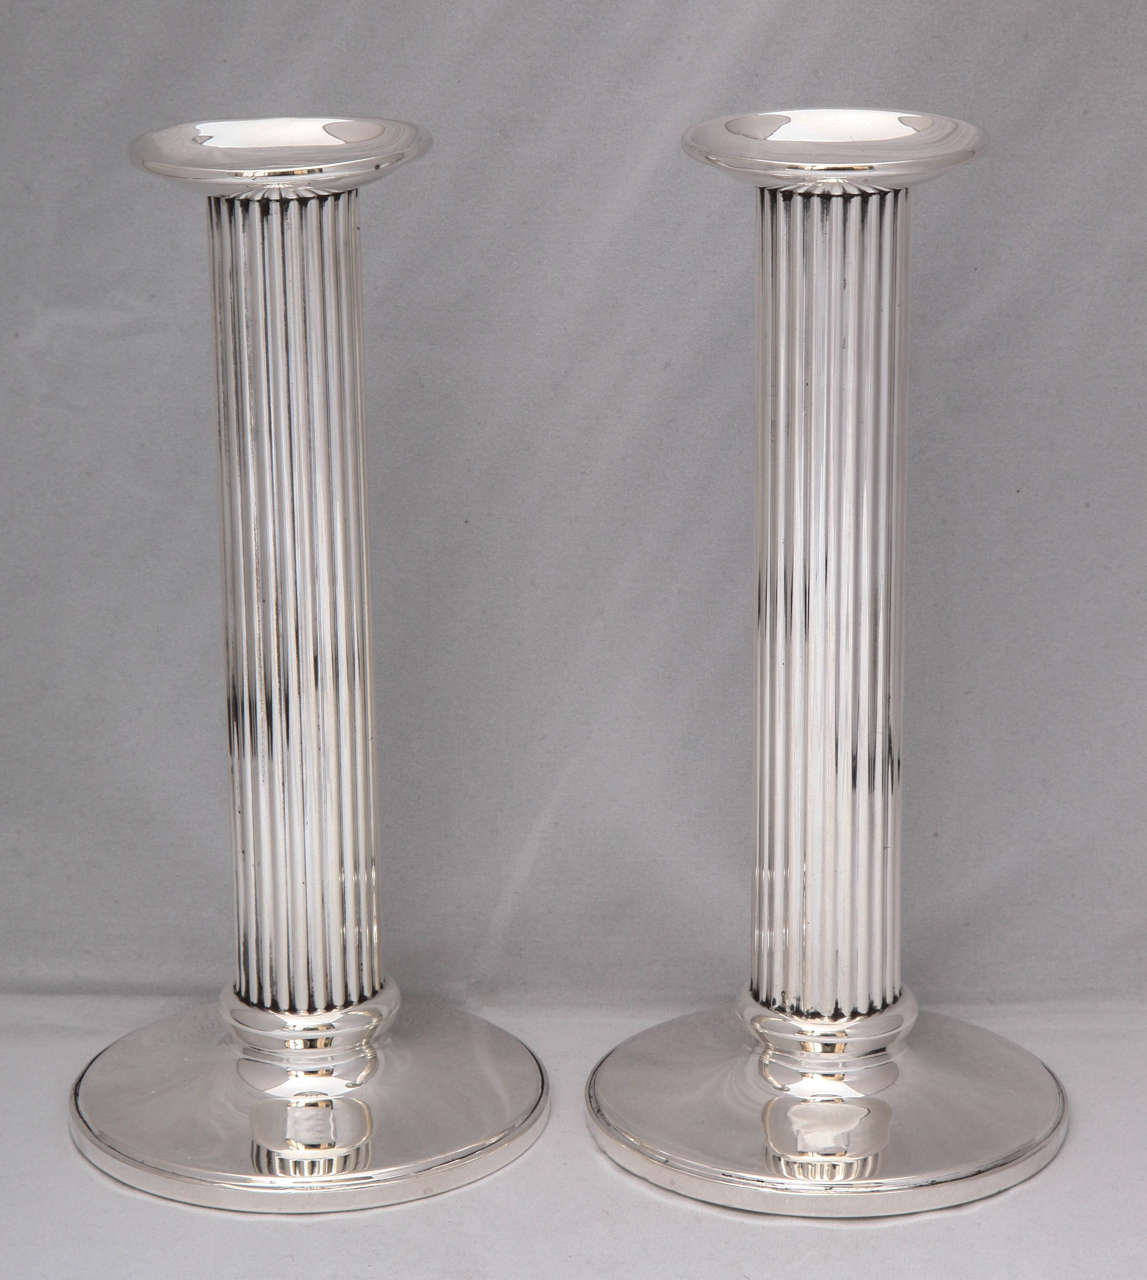 Pair of Edwardian, sterling silver, column - form candlesticks, Hamilton Silver Mfg. Co., New York, Ca. 1910. Columns are 